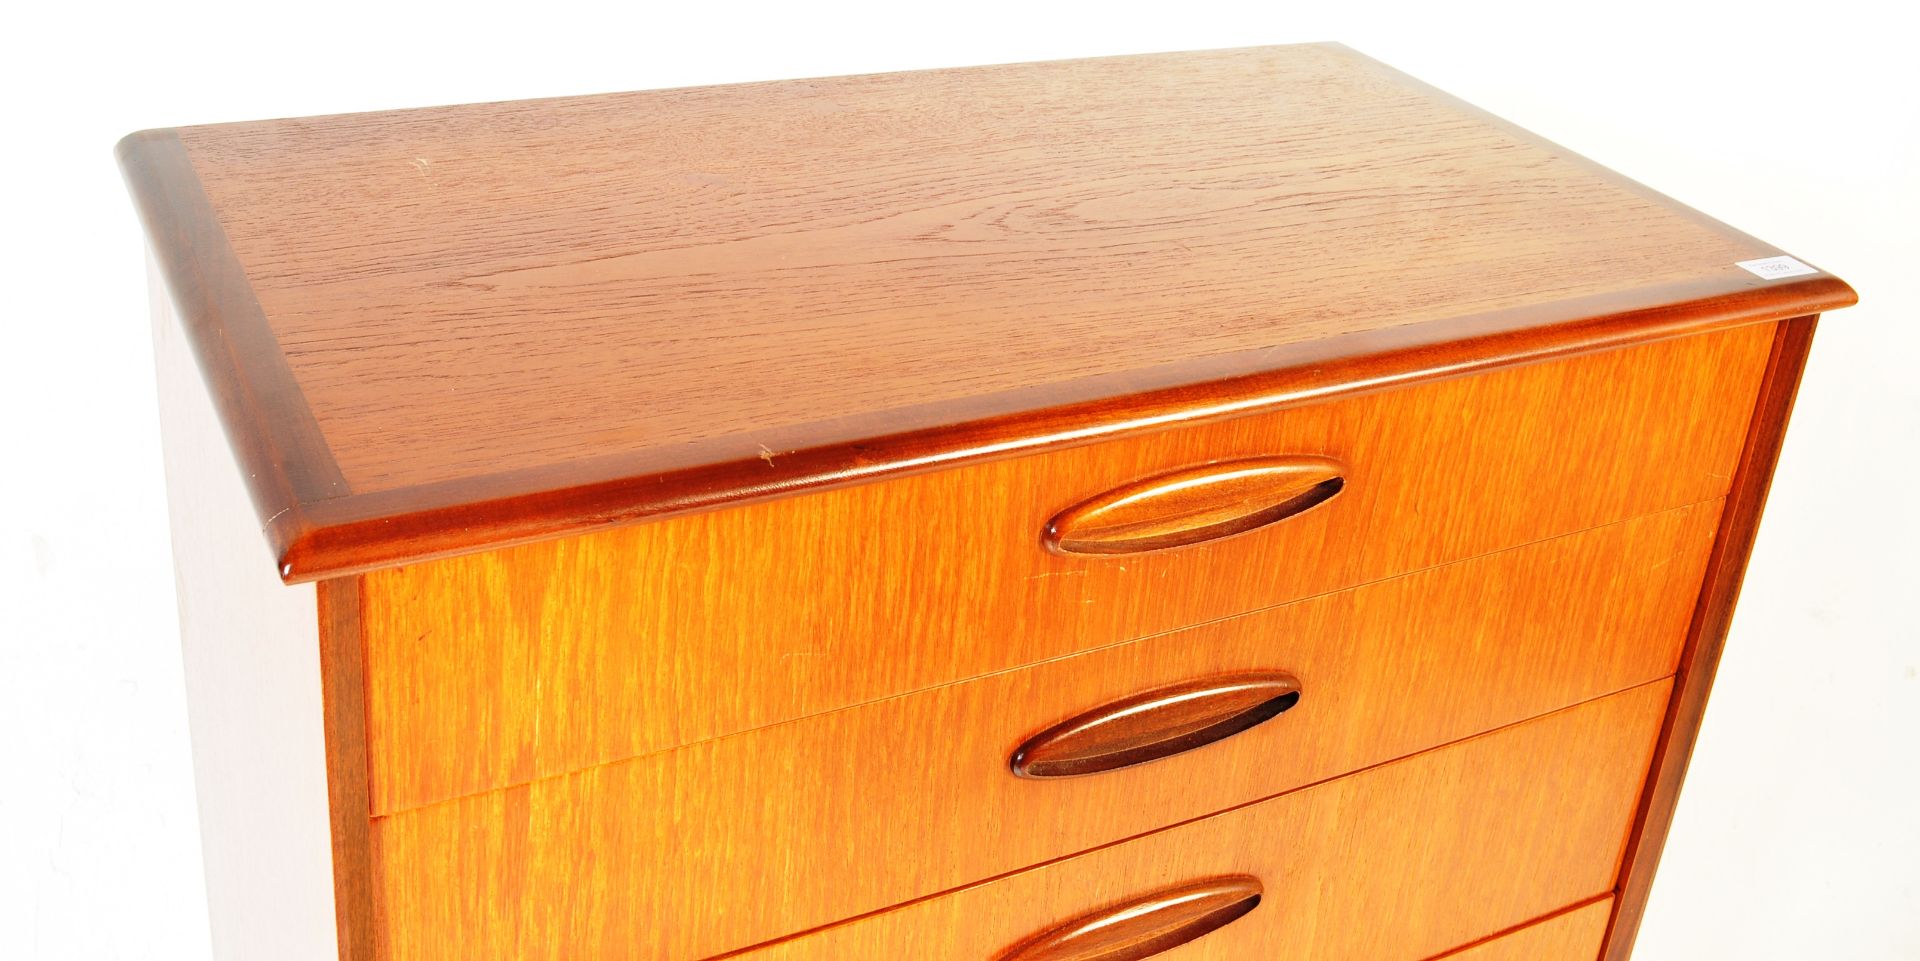 MID 20TH CENTURY TEAK CHEST OF DRAWERS - Image 3 of 7